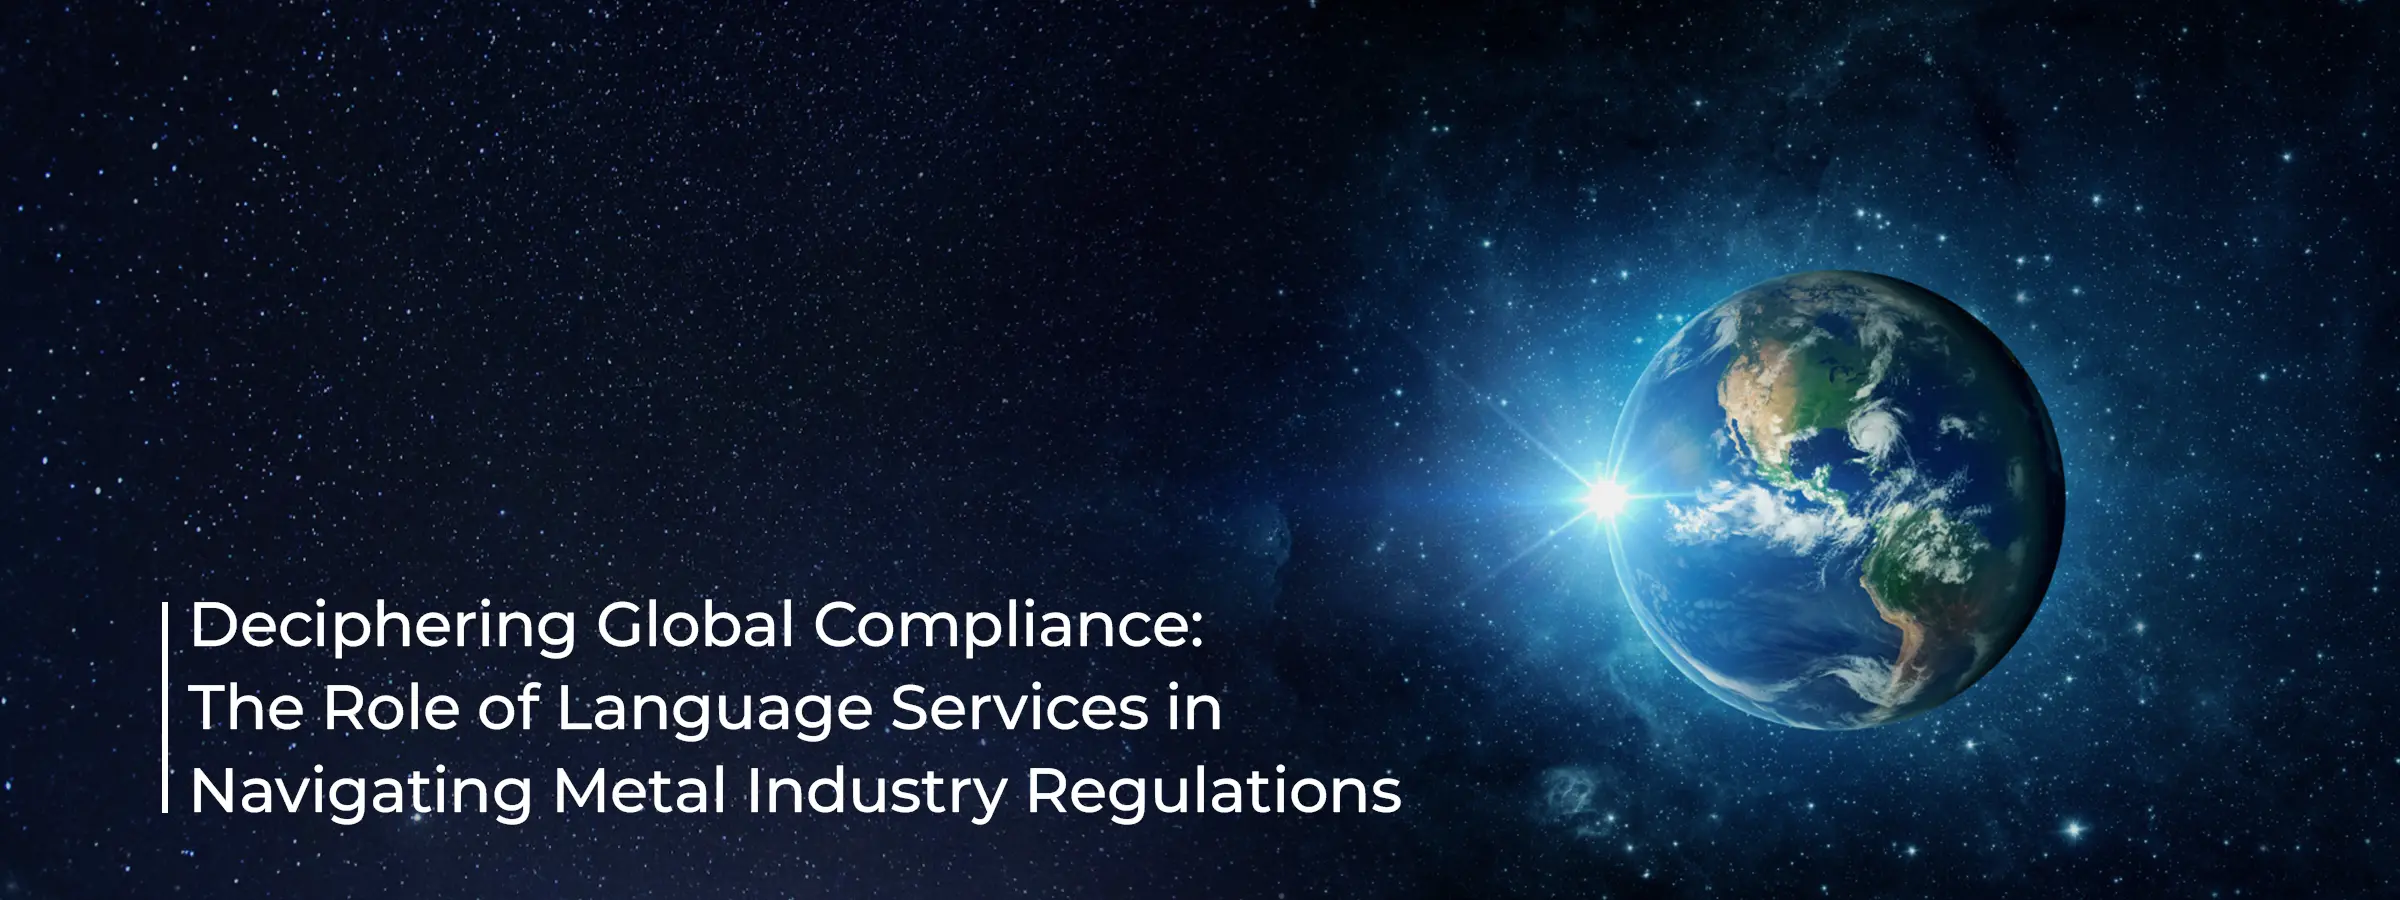 deciphering-global-compliance-the-role-of-language-services-in-navigating-metal-industry-regulations